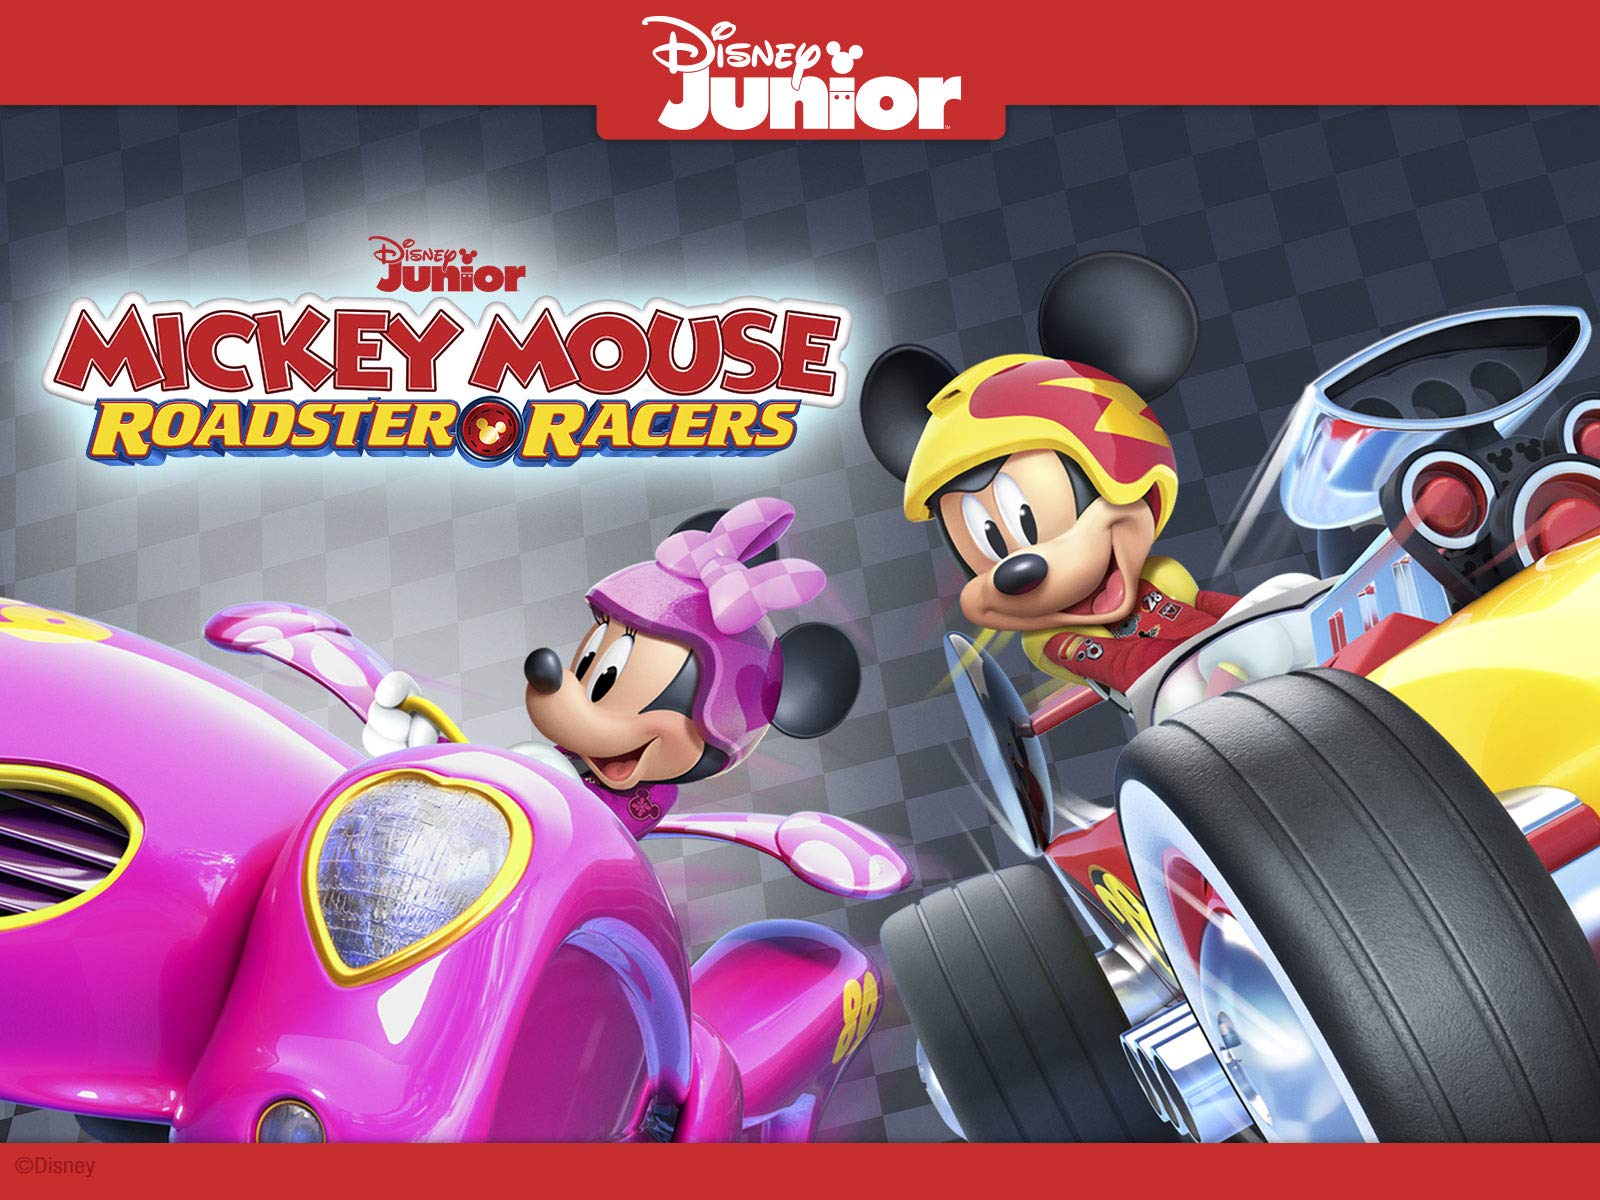 Watch Mickey and the Roadster Racers Volume 4